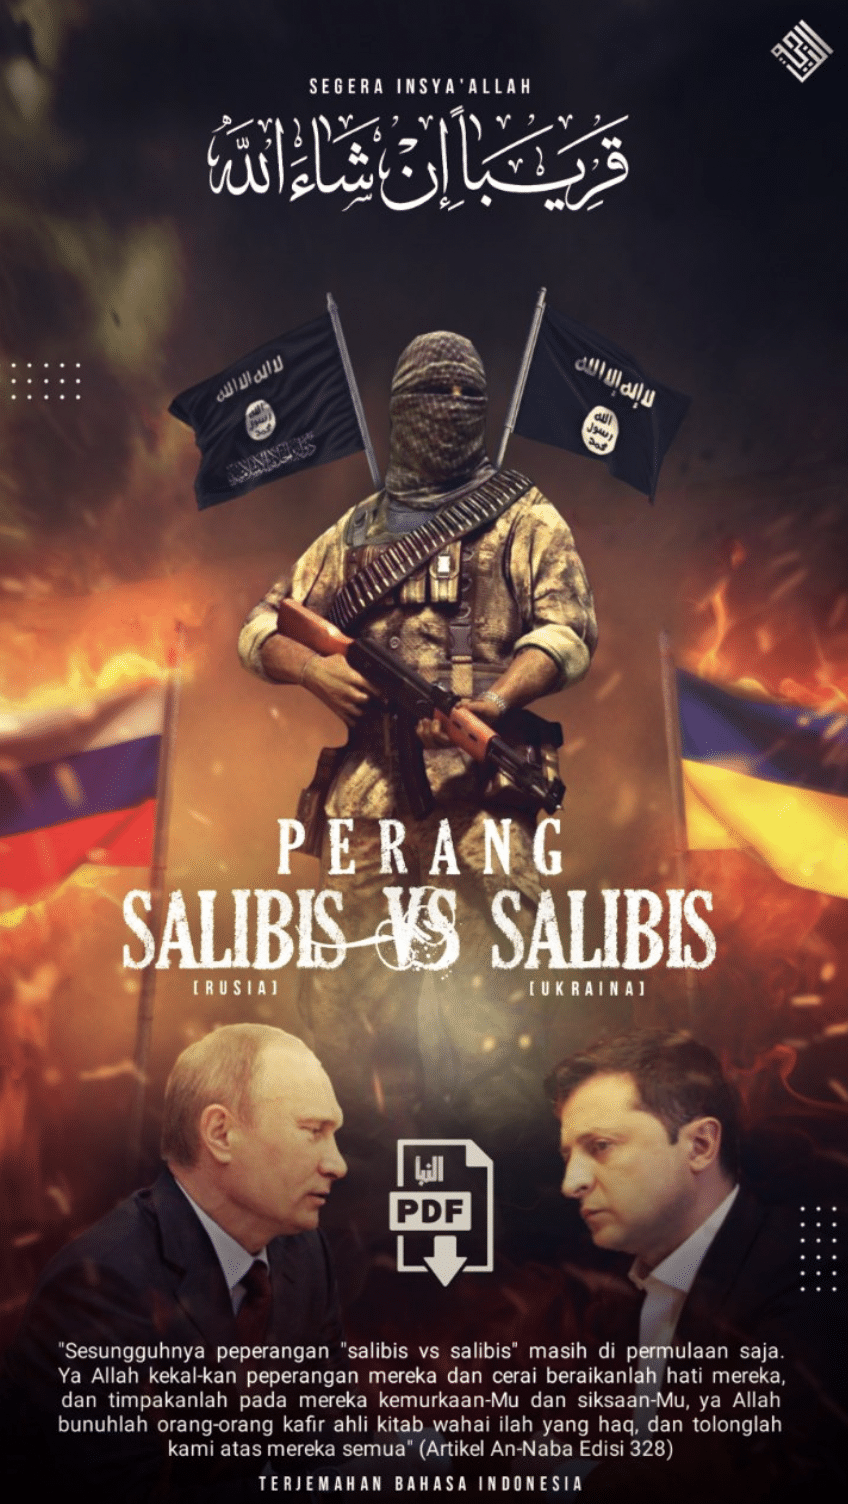 Islamic State Indonesian Supporters "Crusaders vs. Crusaders" Comments on Ukraine / Russian War - 08 March 2022